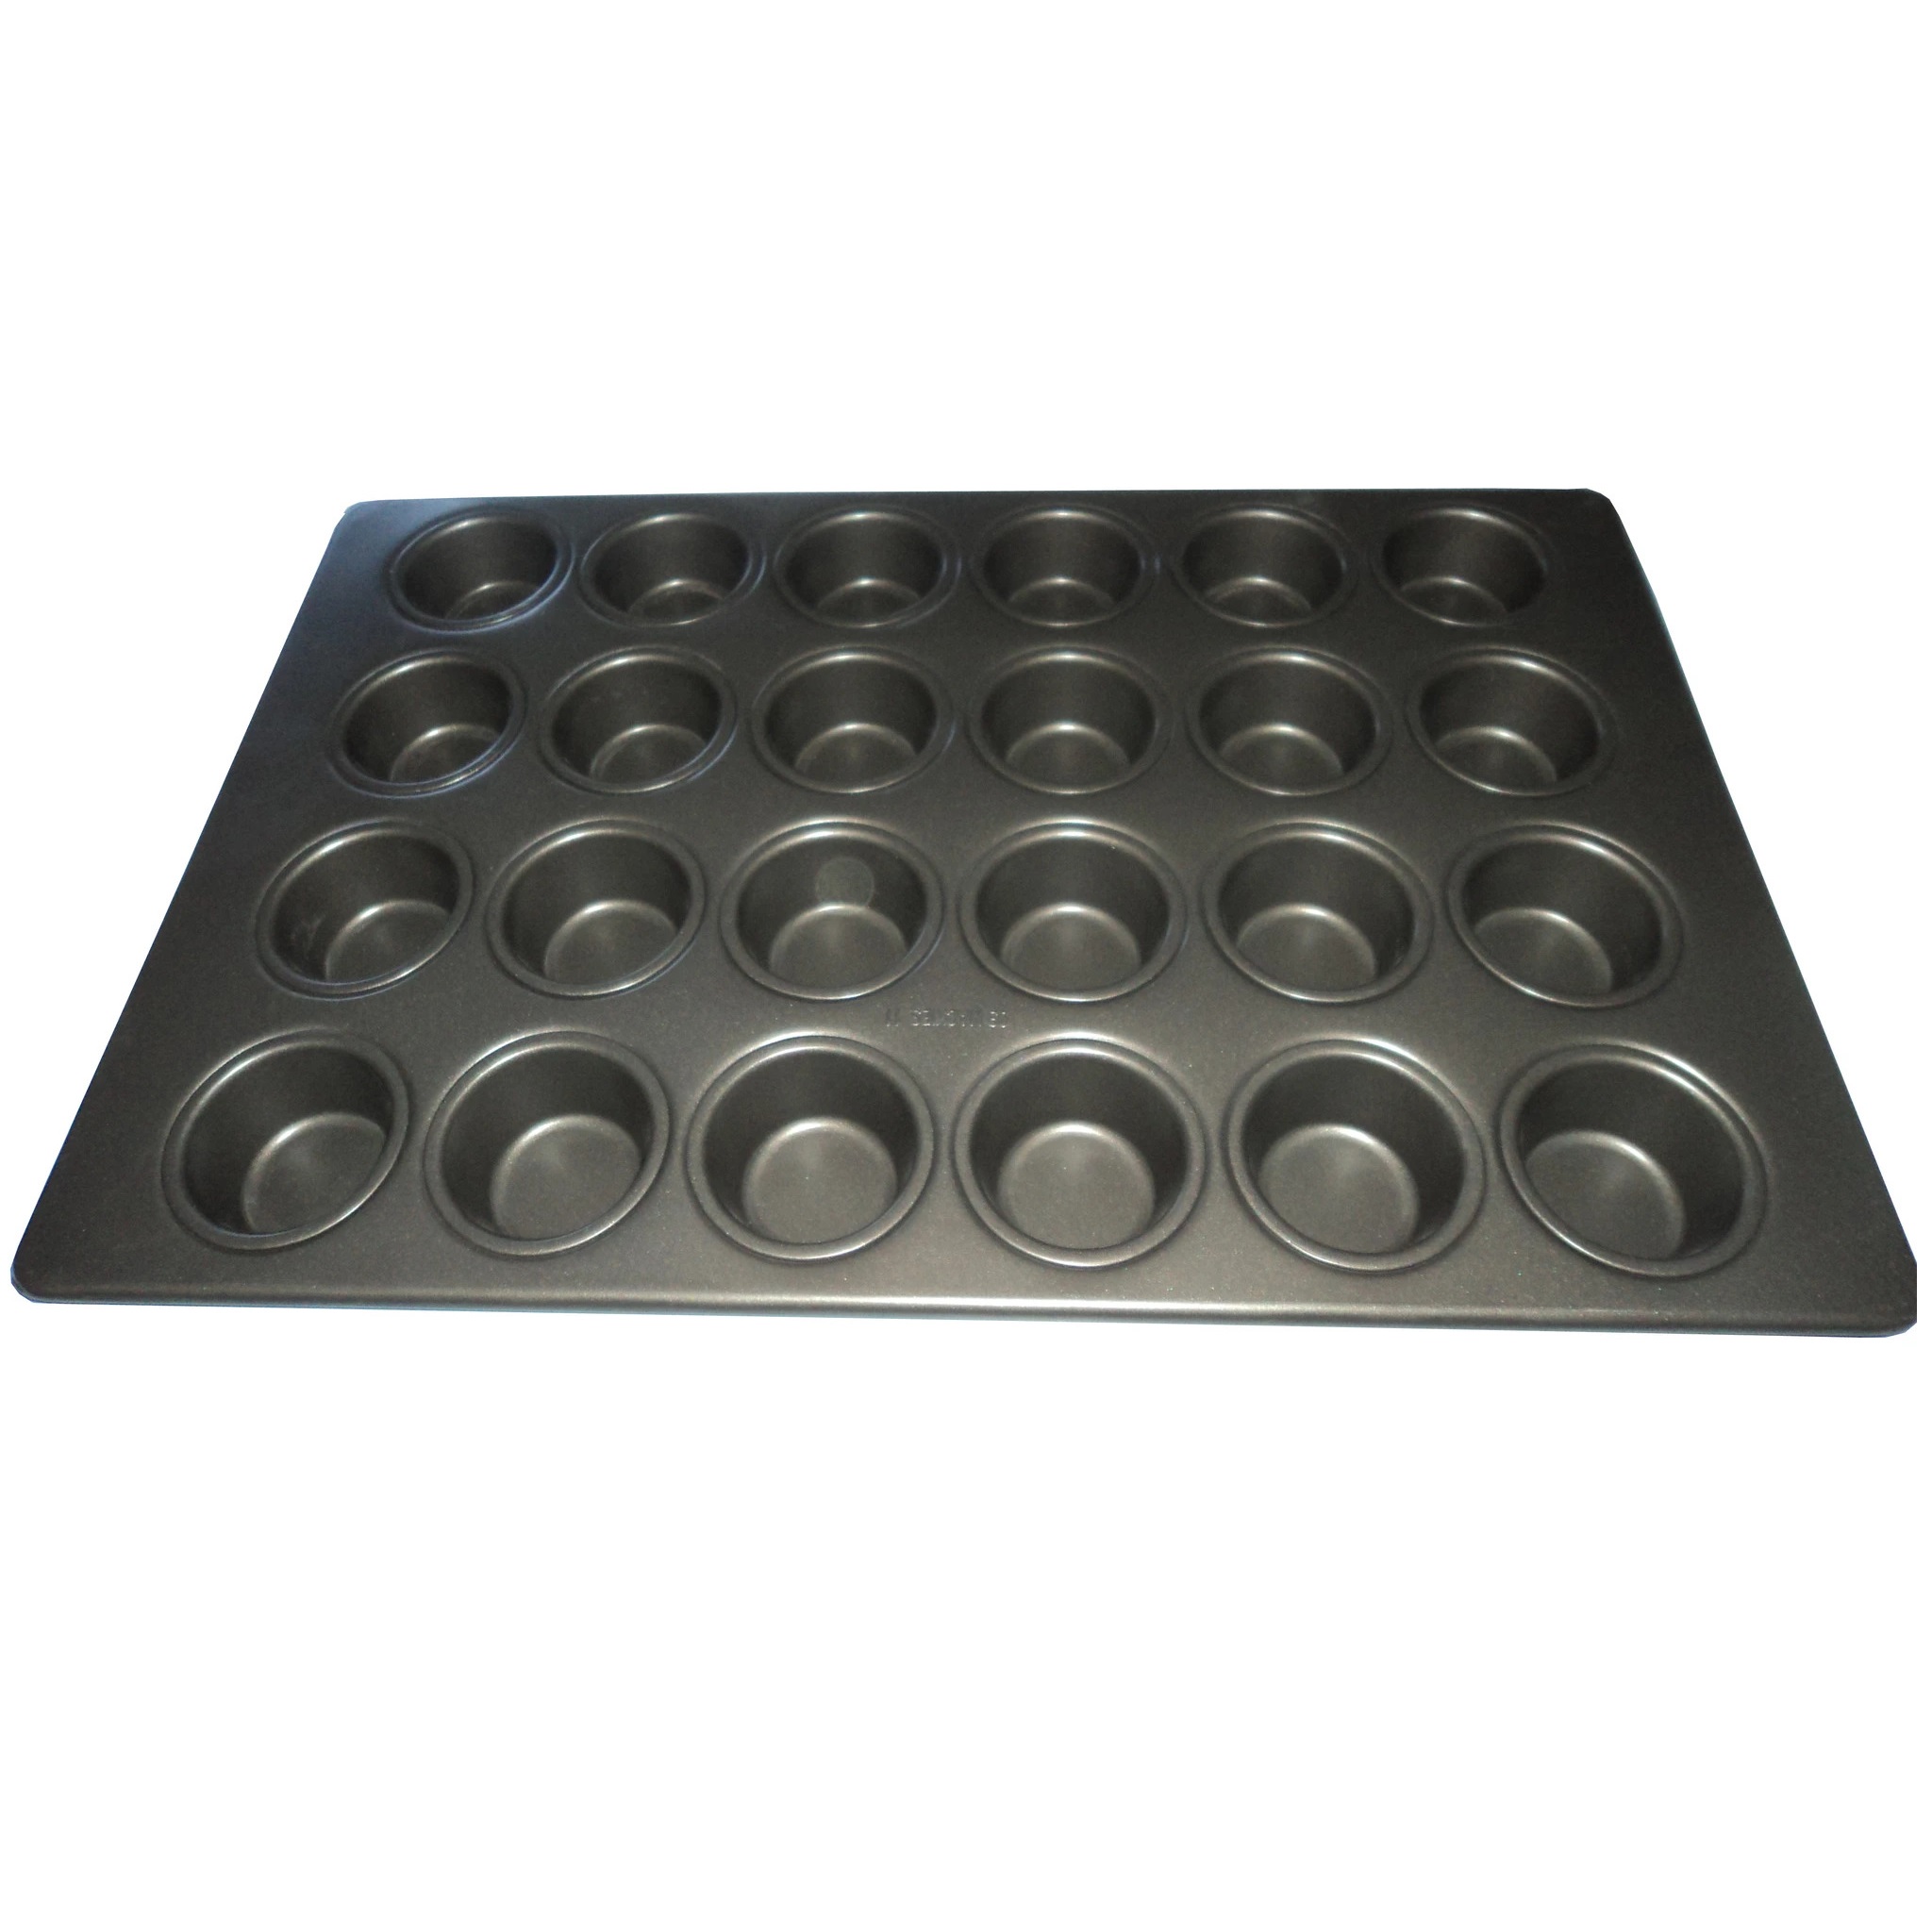 Extra-Large Cup Muffin Tray » Australian Bakery Equipment Supplies